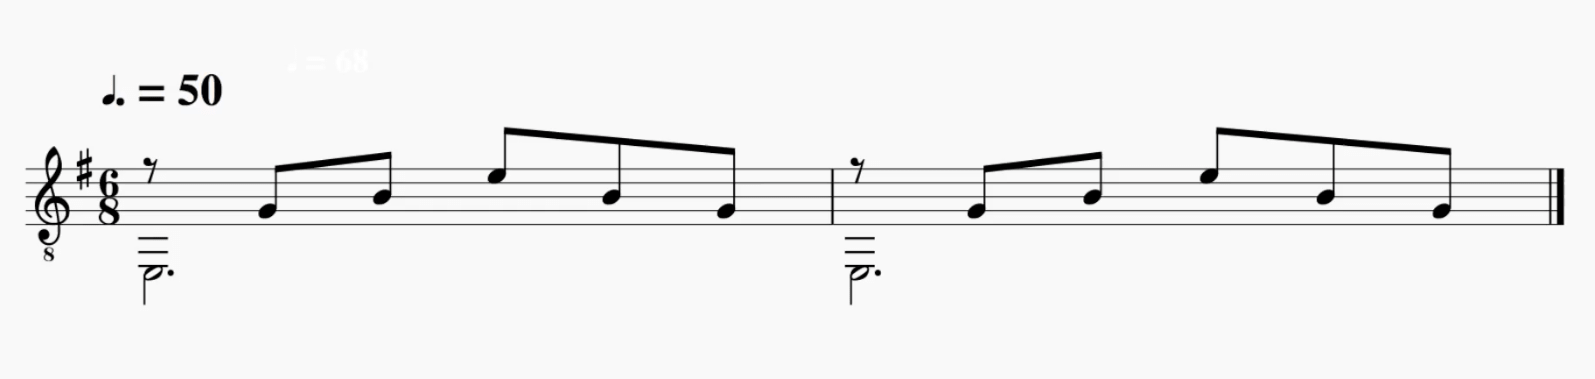 Compound meters: 6/8 time signature